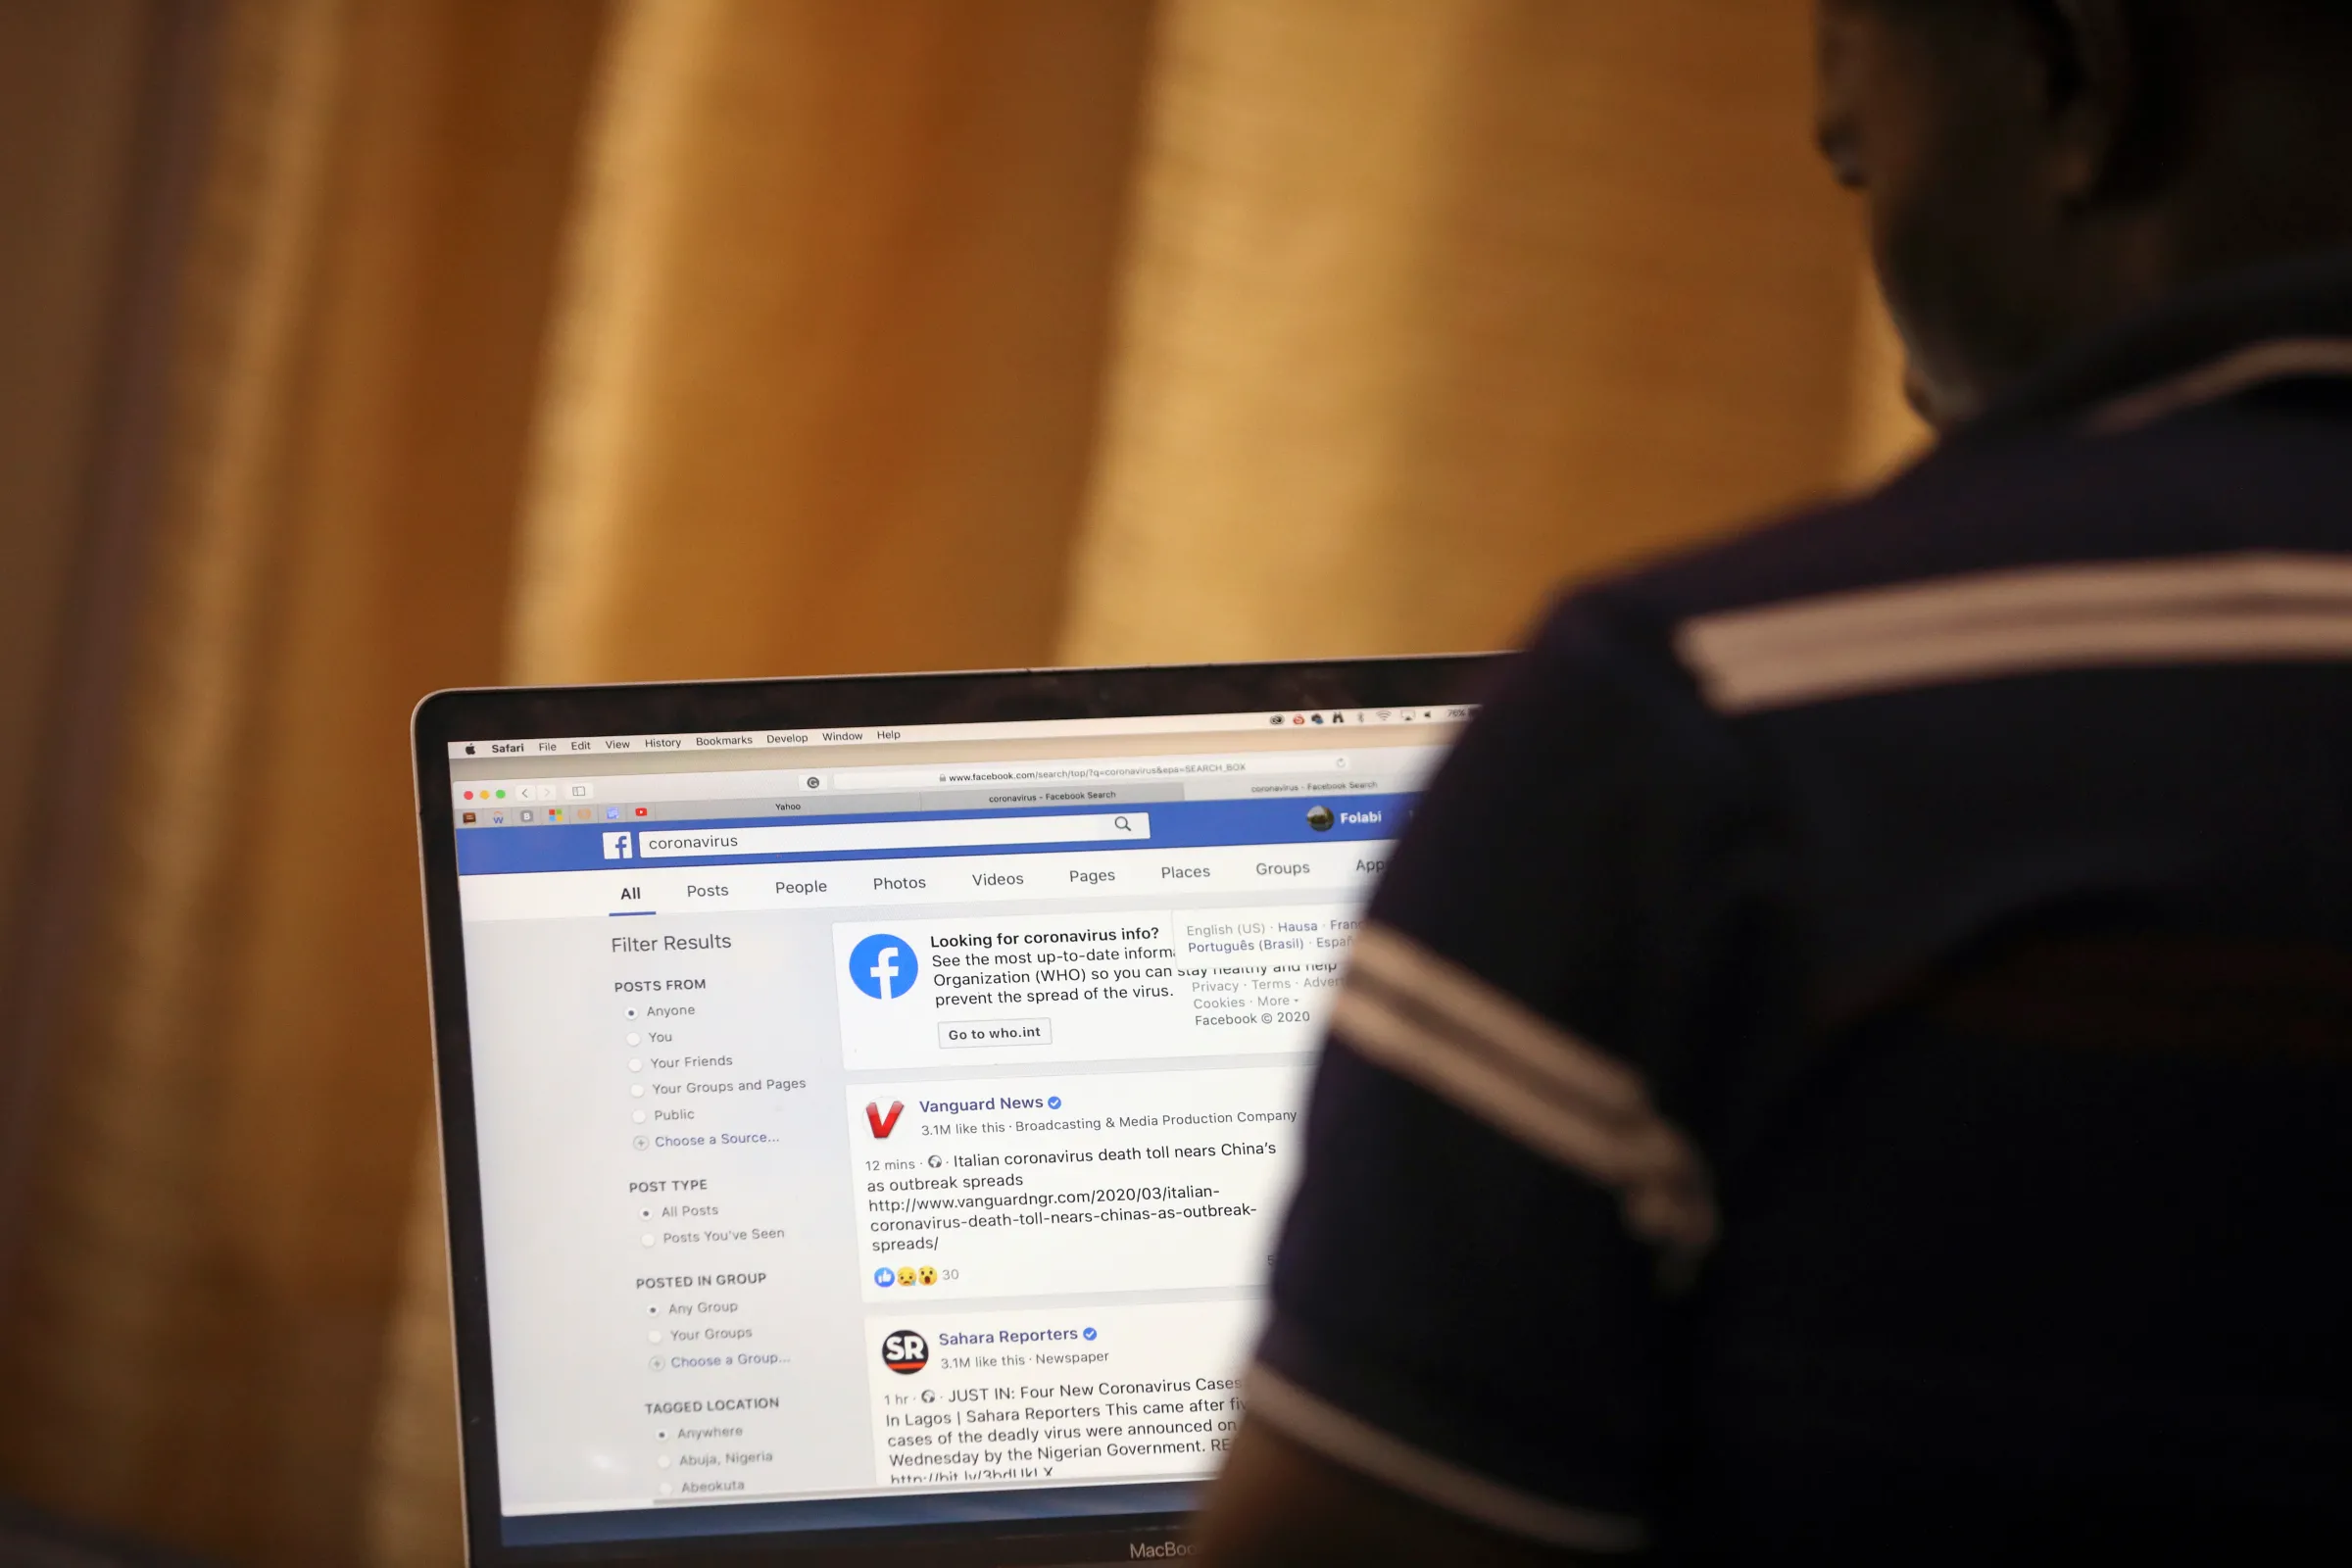 A man opens the Facebook page on his computer to fact check coronavirus disease (COVID-19) information, in Abuja, Nigeria March 19, 2020.